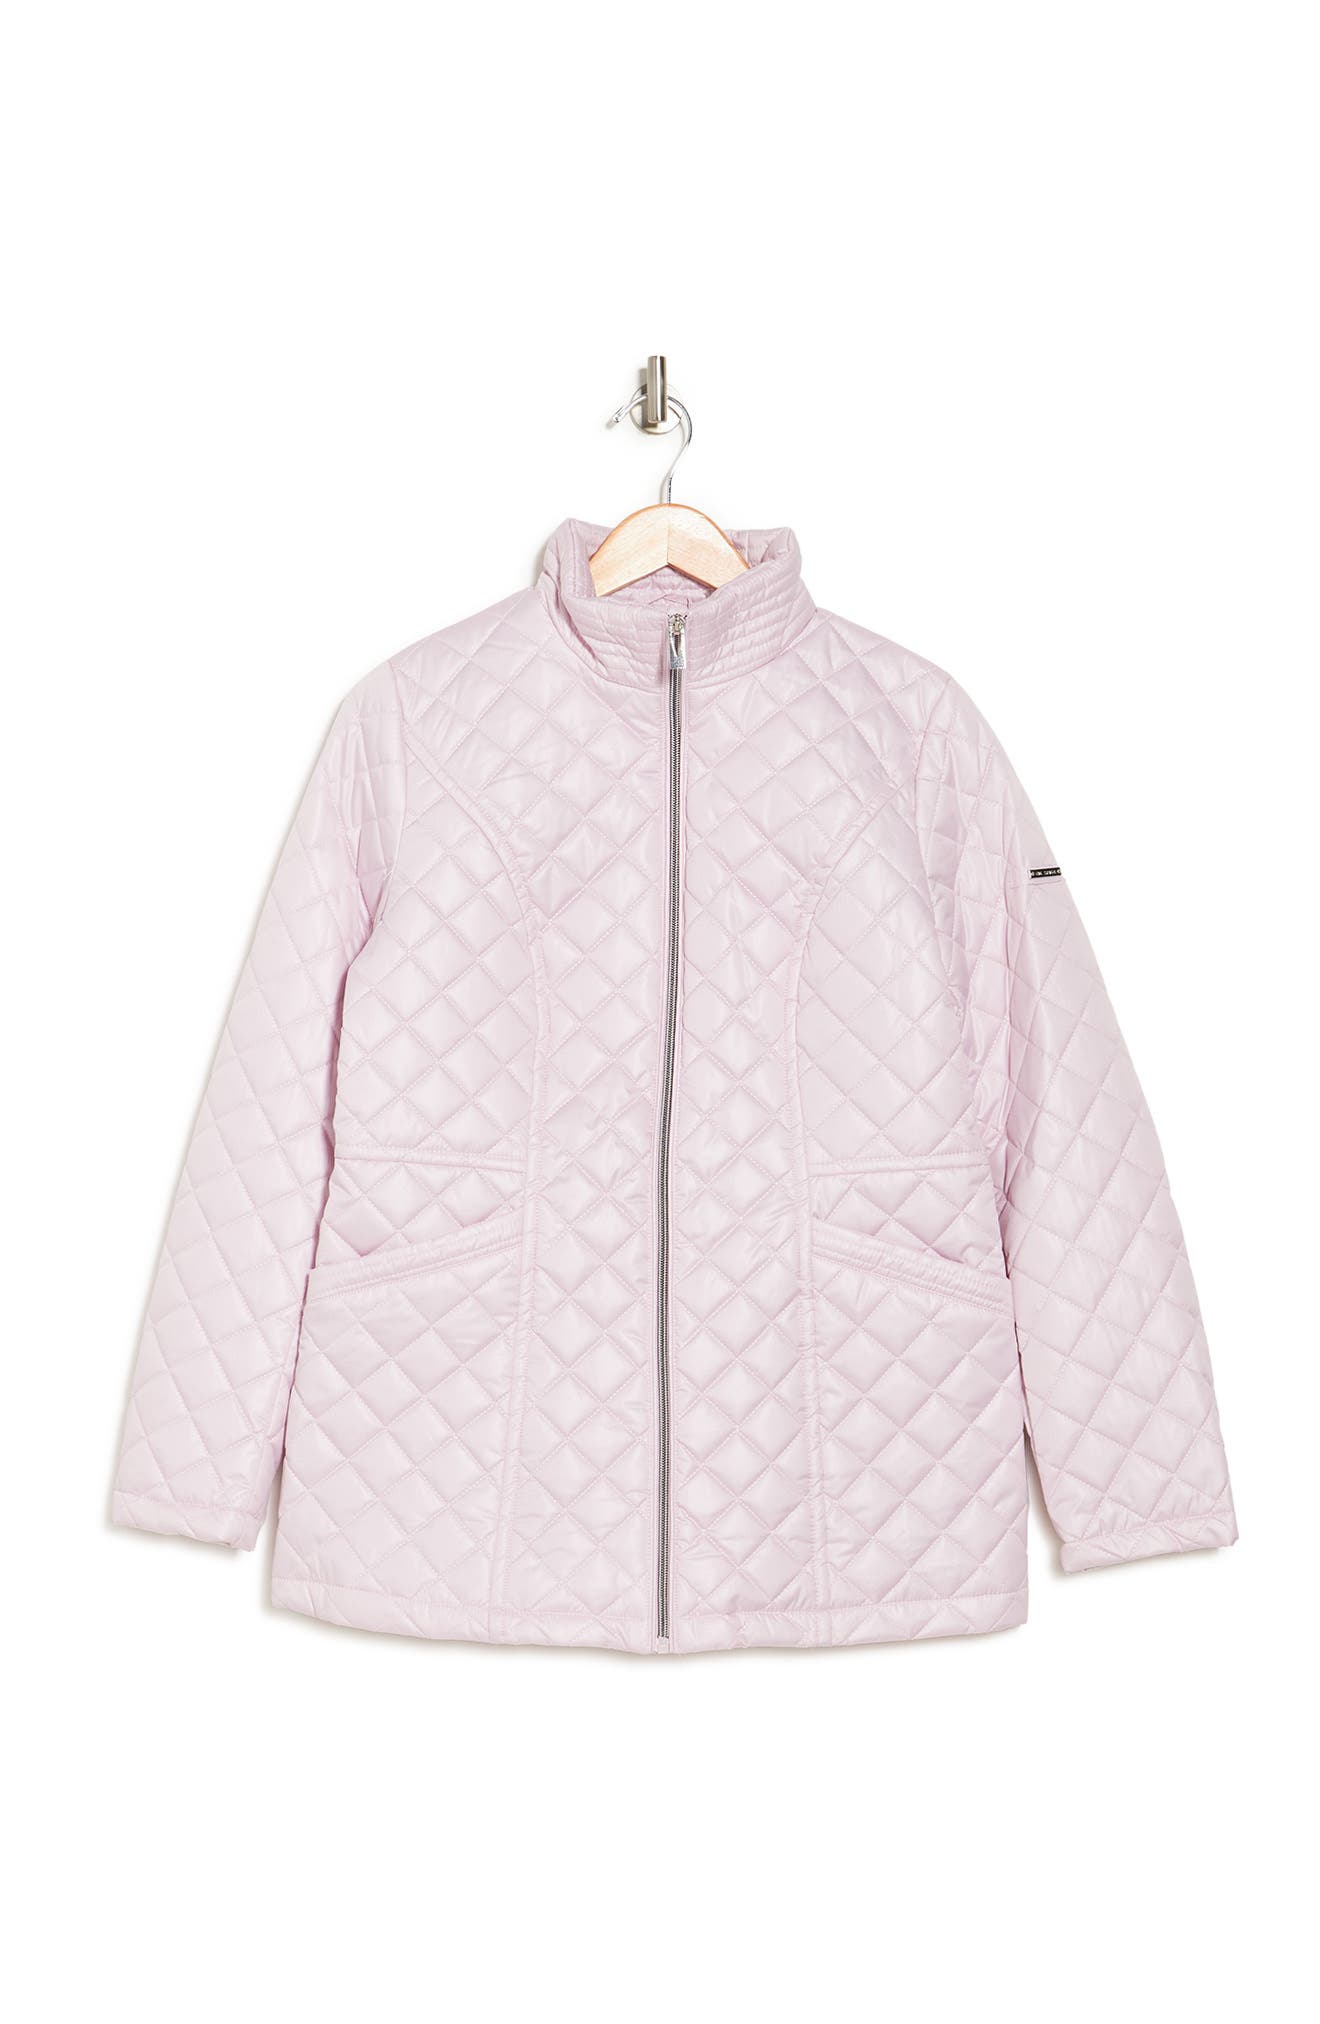 Via Spiga STAND COLLAR QUILTED JACKET